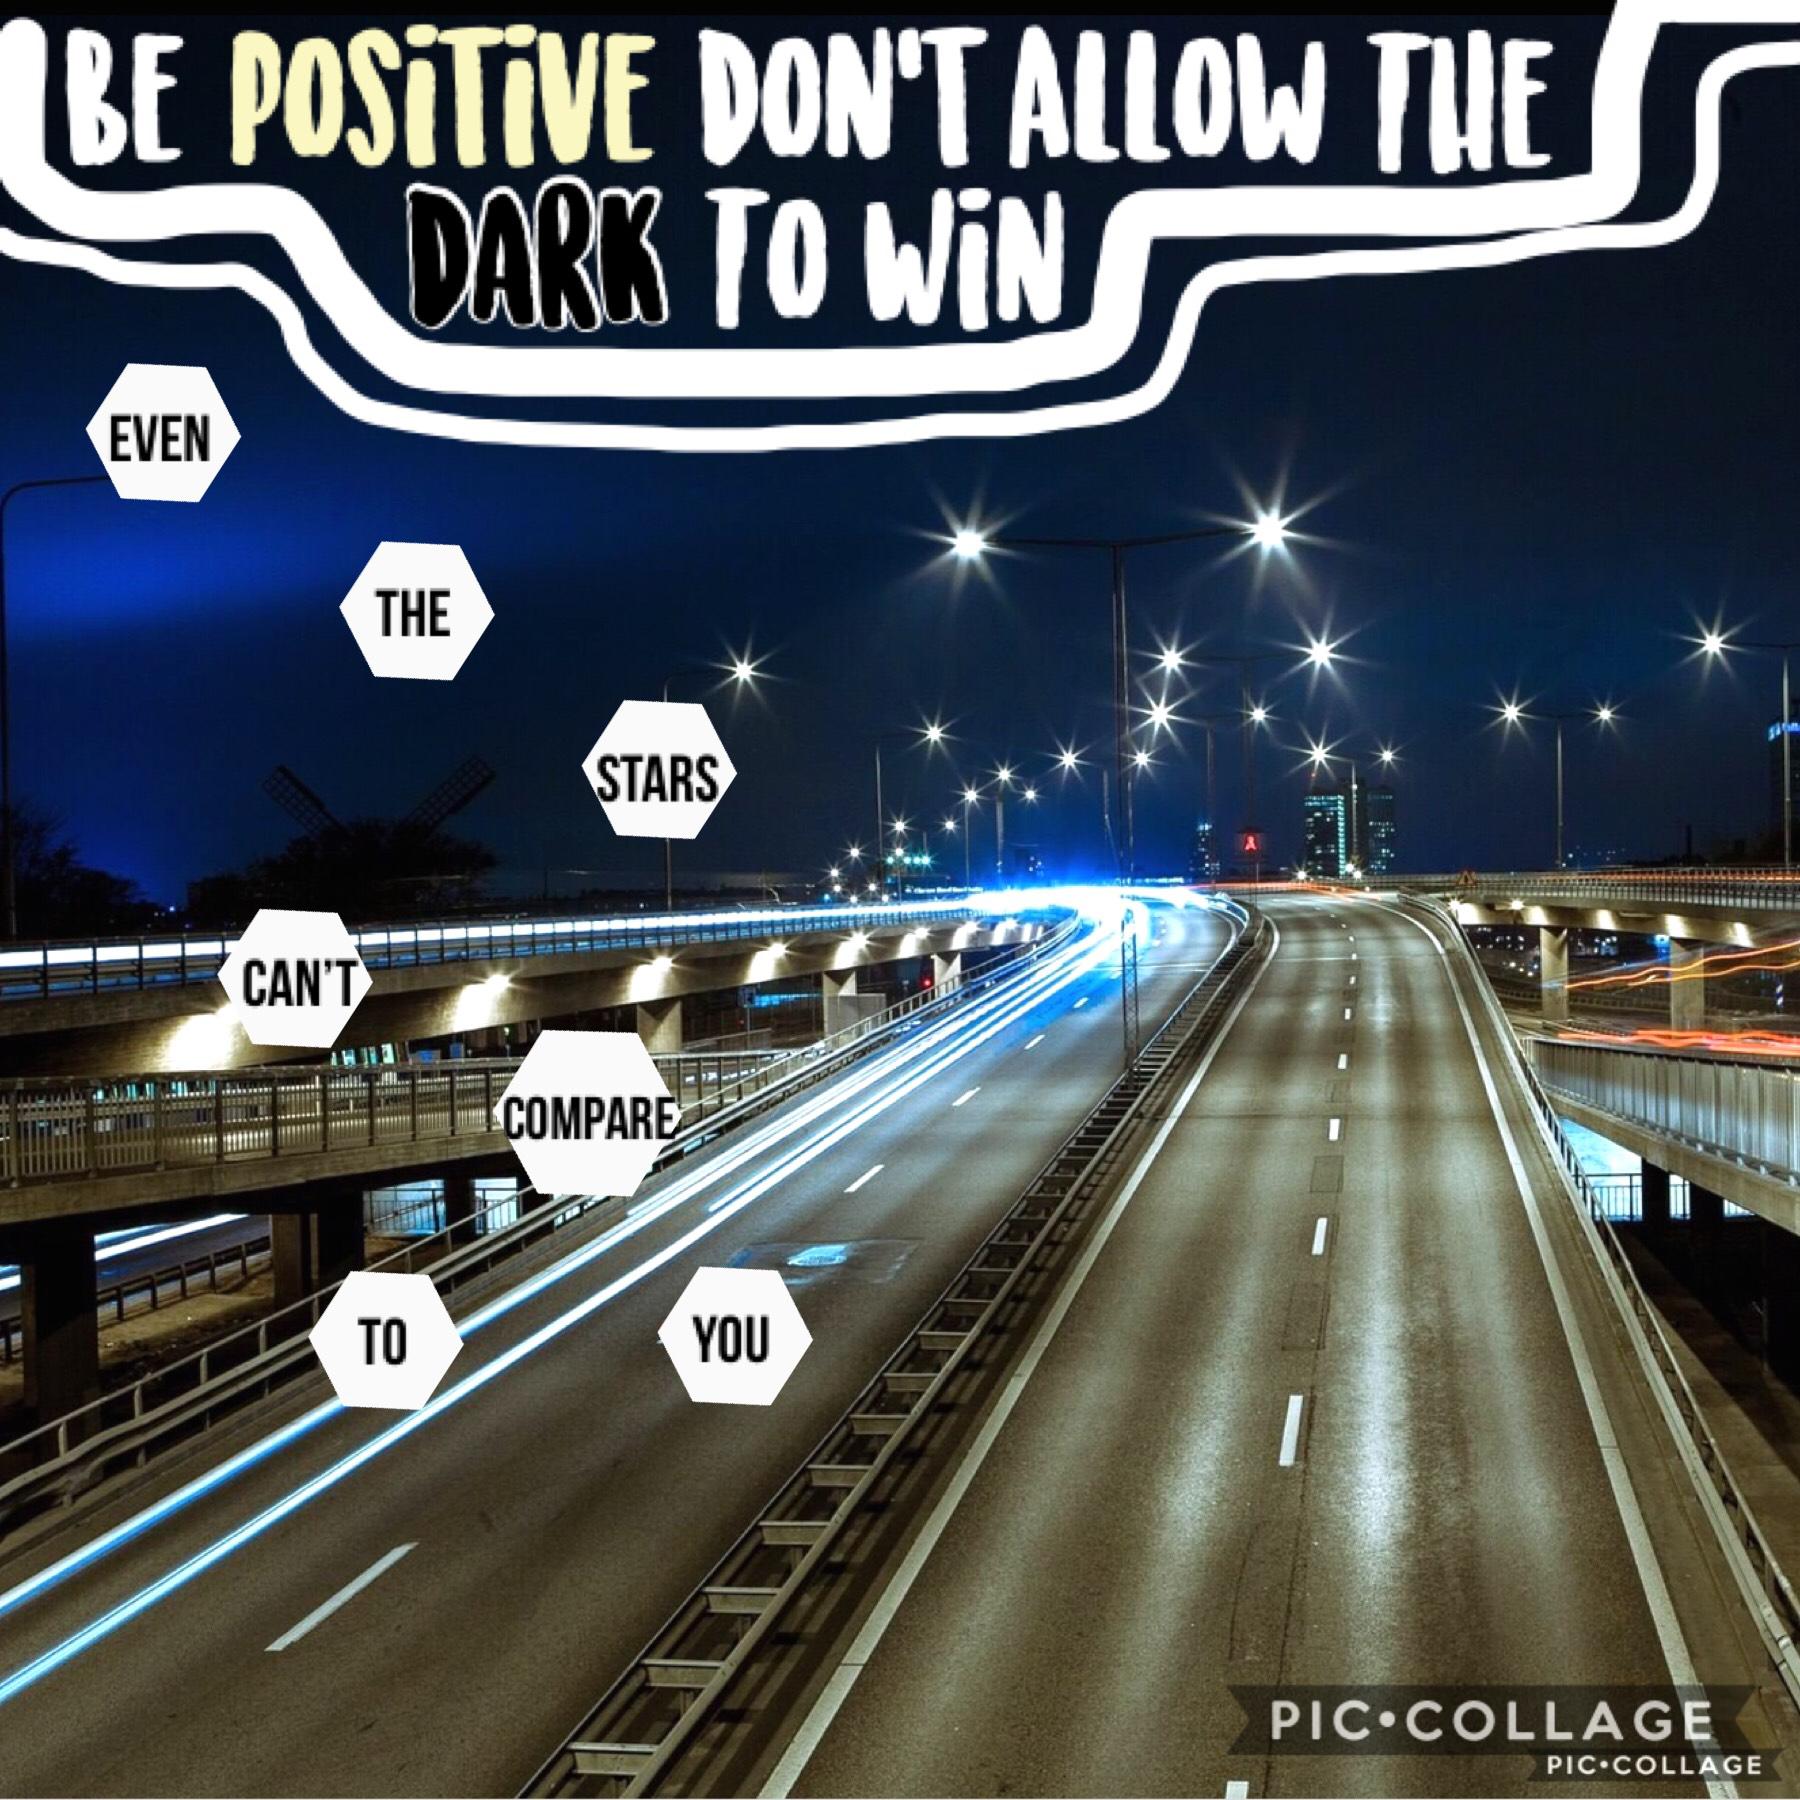 Be positive don’t allow the dark side to win.